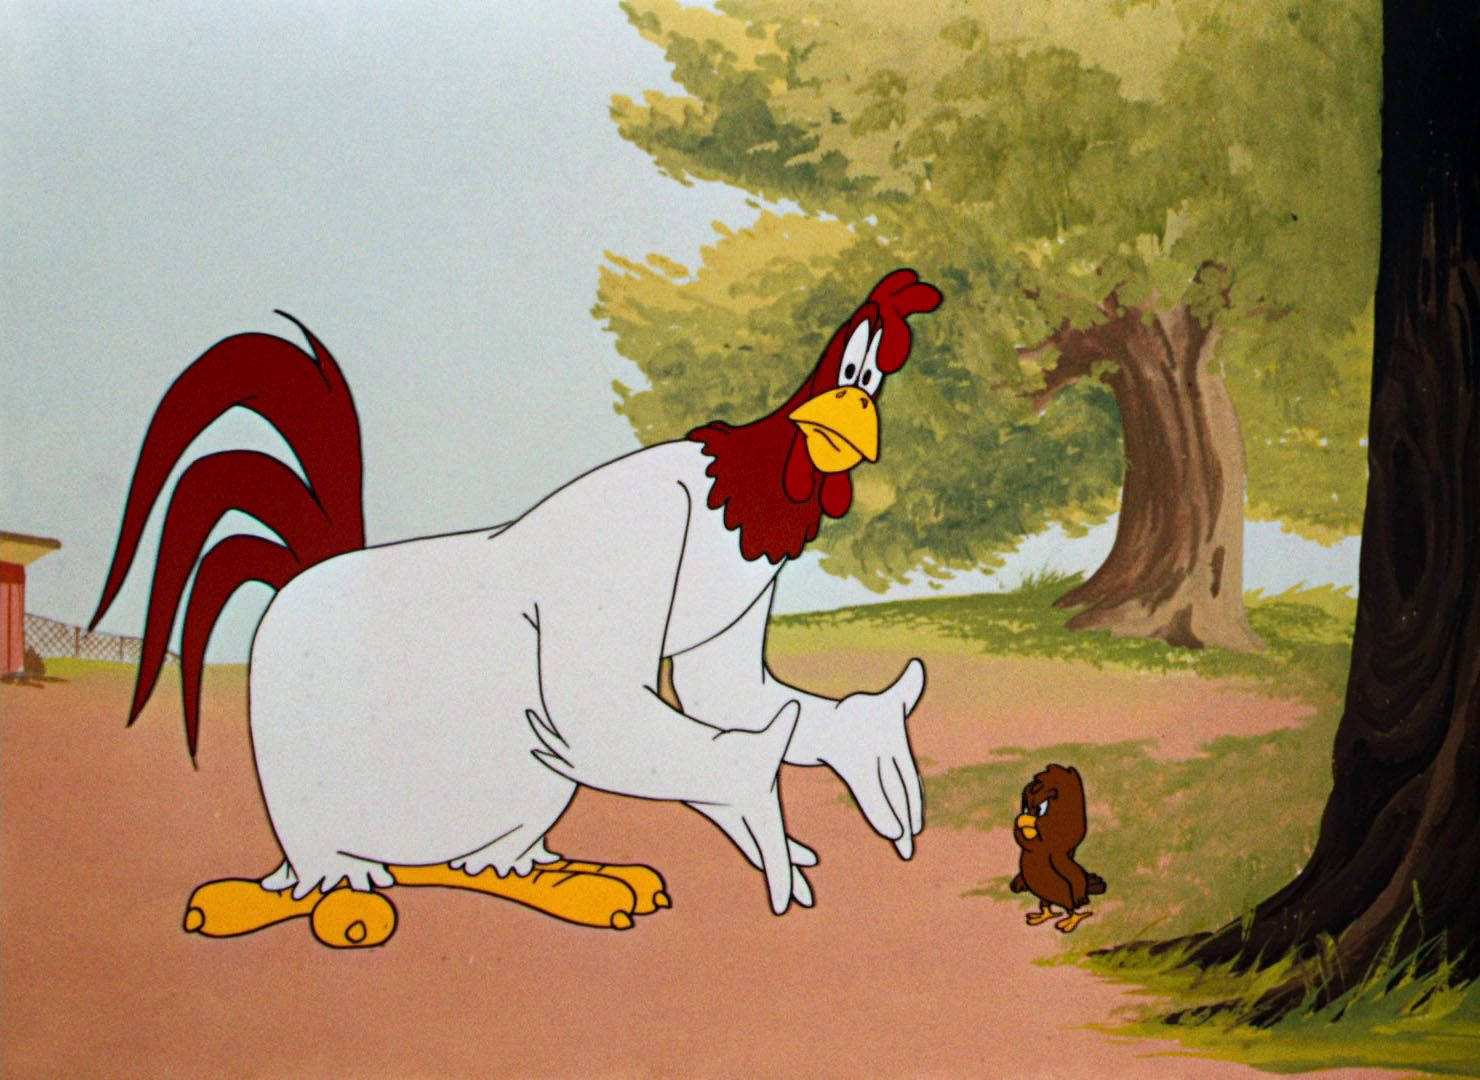 Foghorn Leghorn, the famous character from Looney Tunes Wallpaper